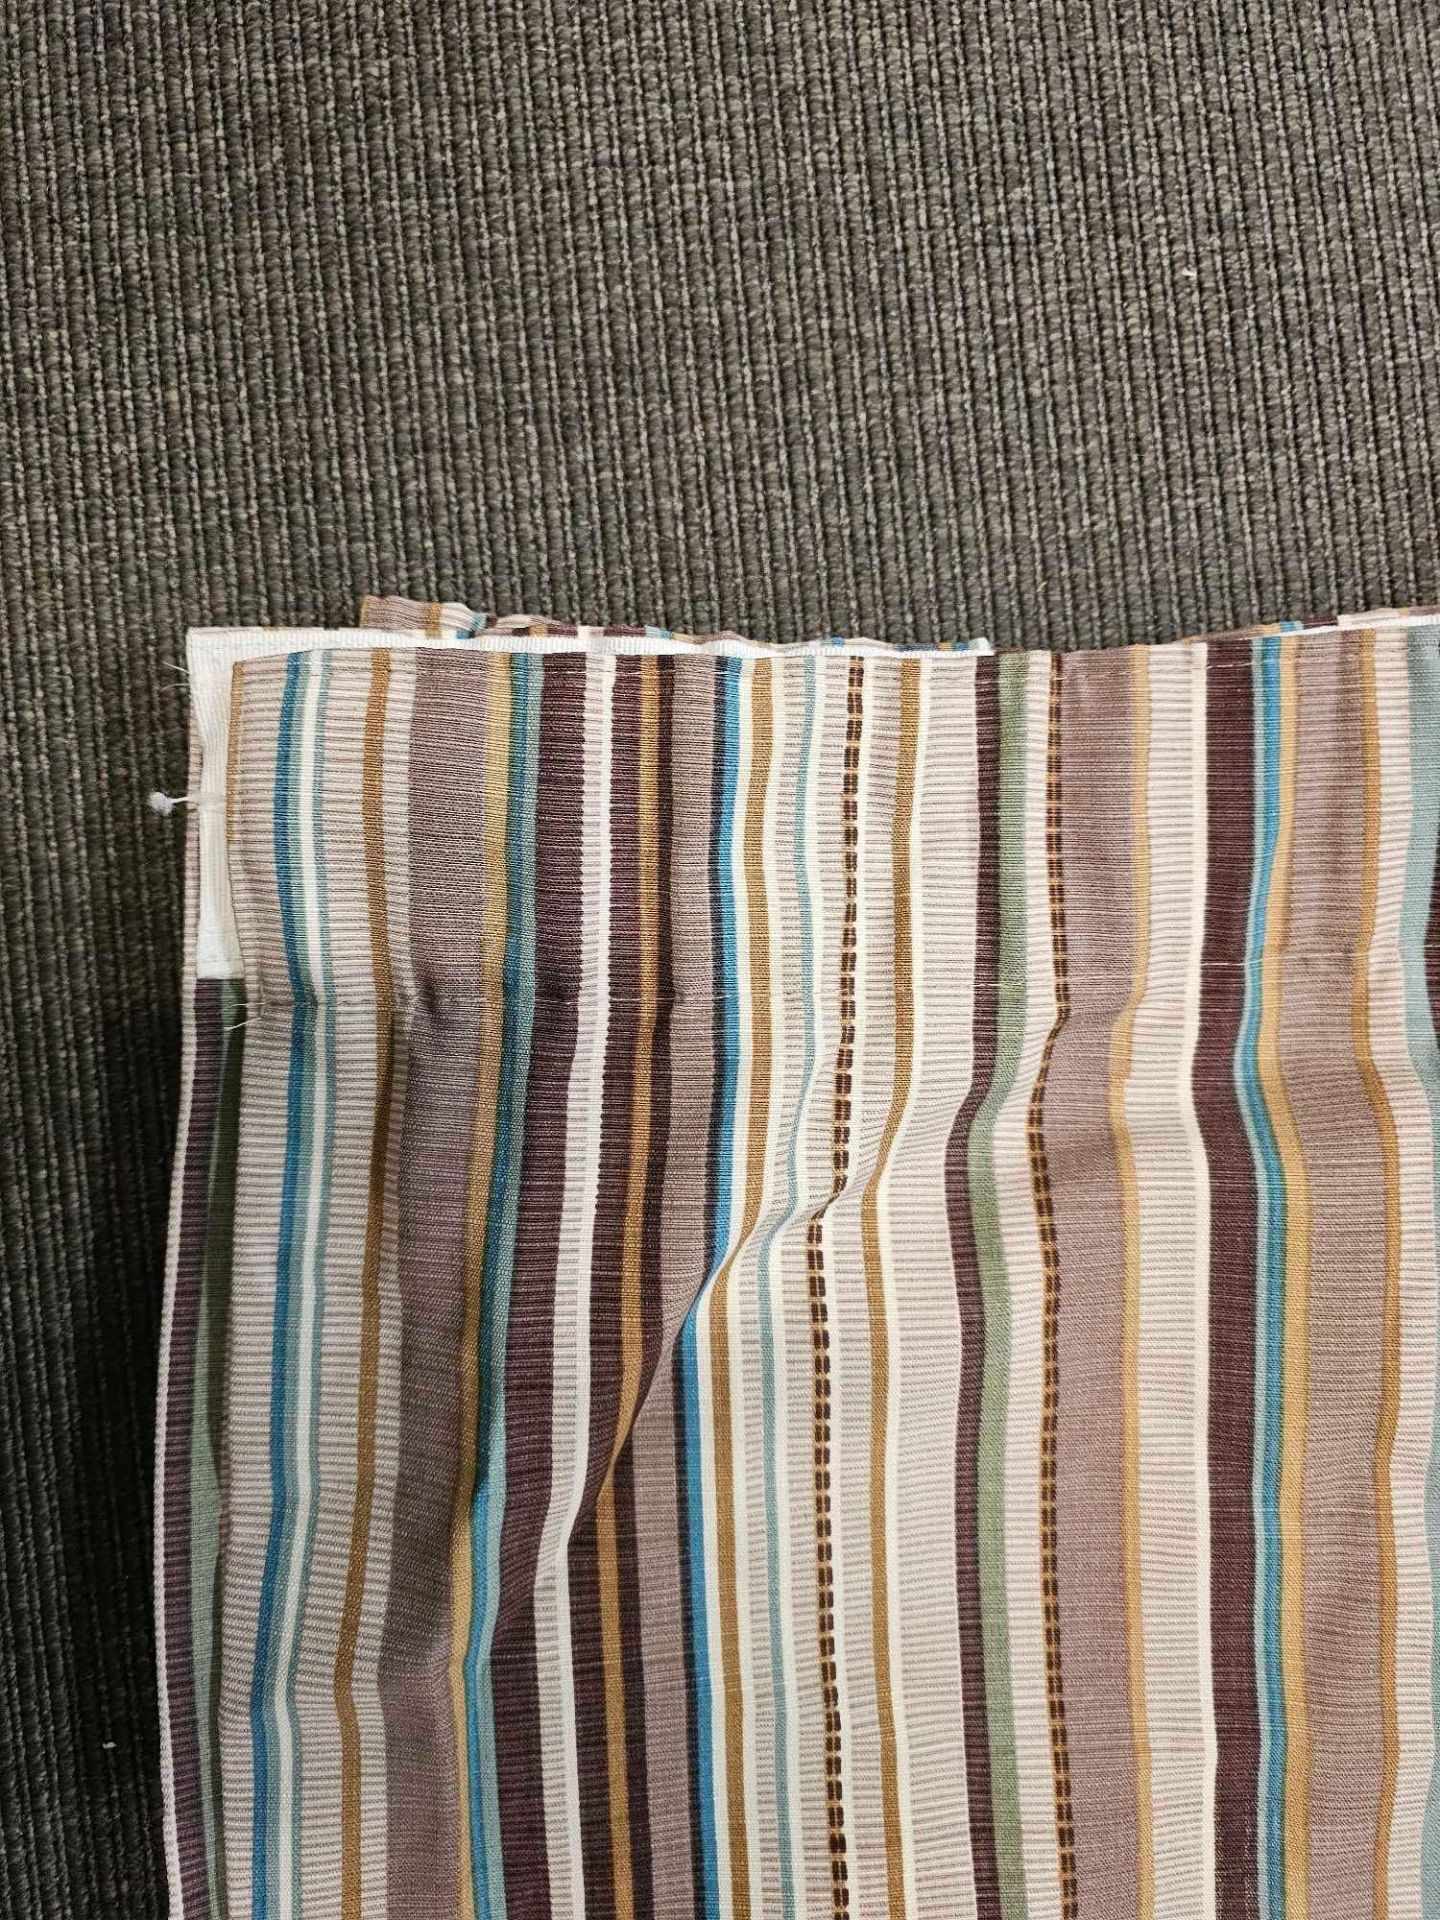 A Pair If Fabric Striped Curtains Brown Beige Green Blue Size -cm 220 x 200 Ref Dorch 73 - Image 2 of 3